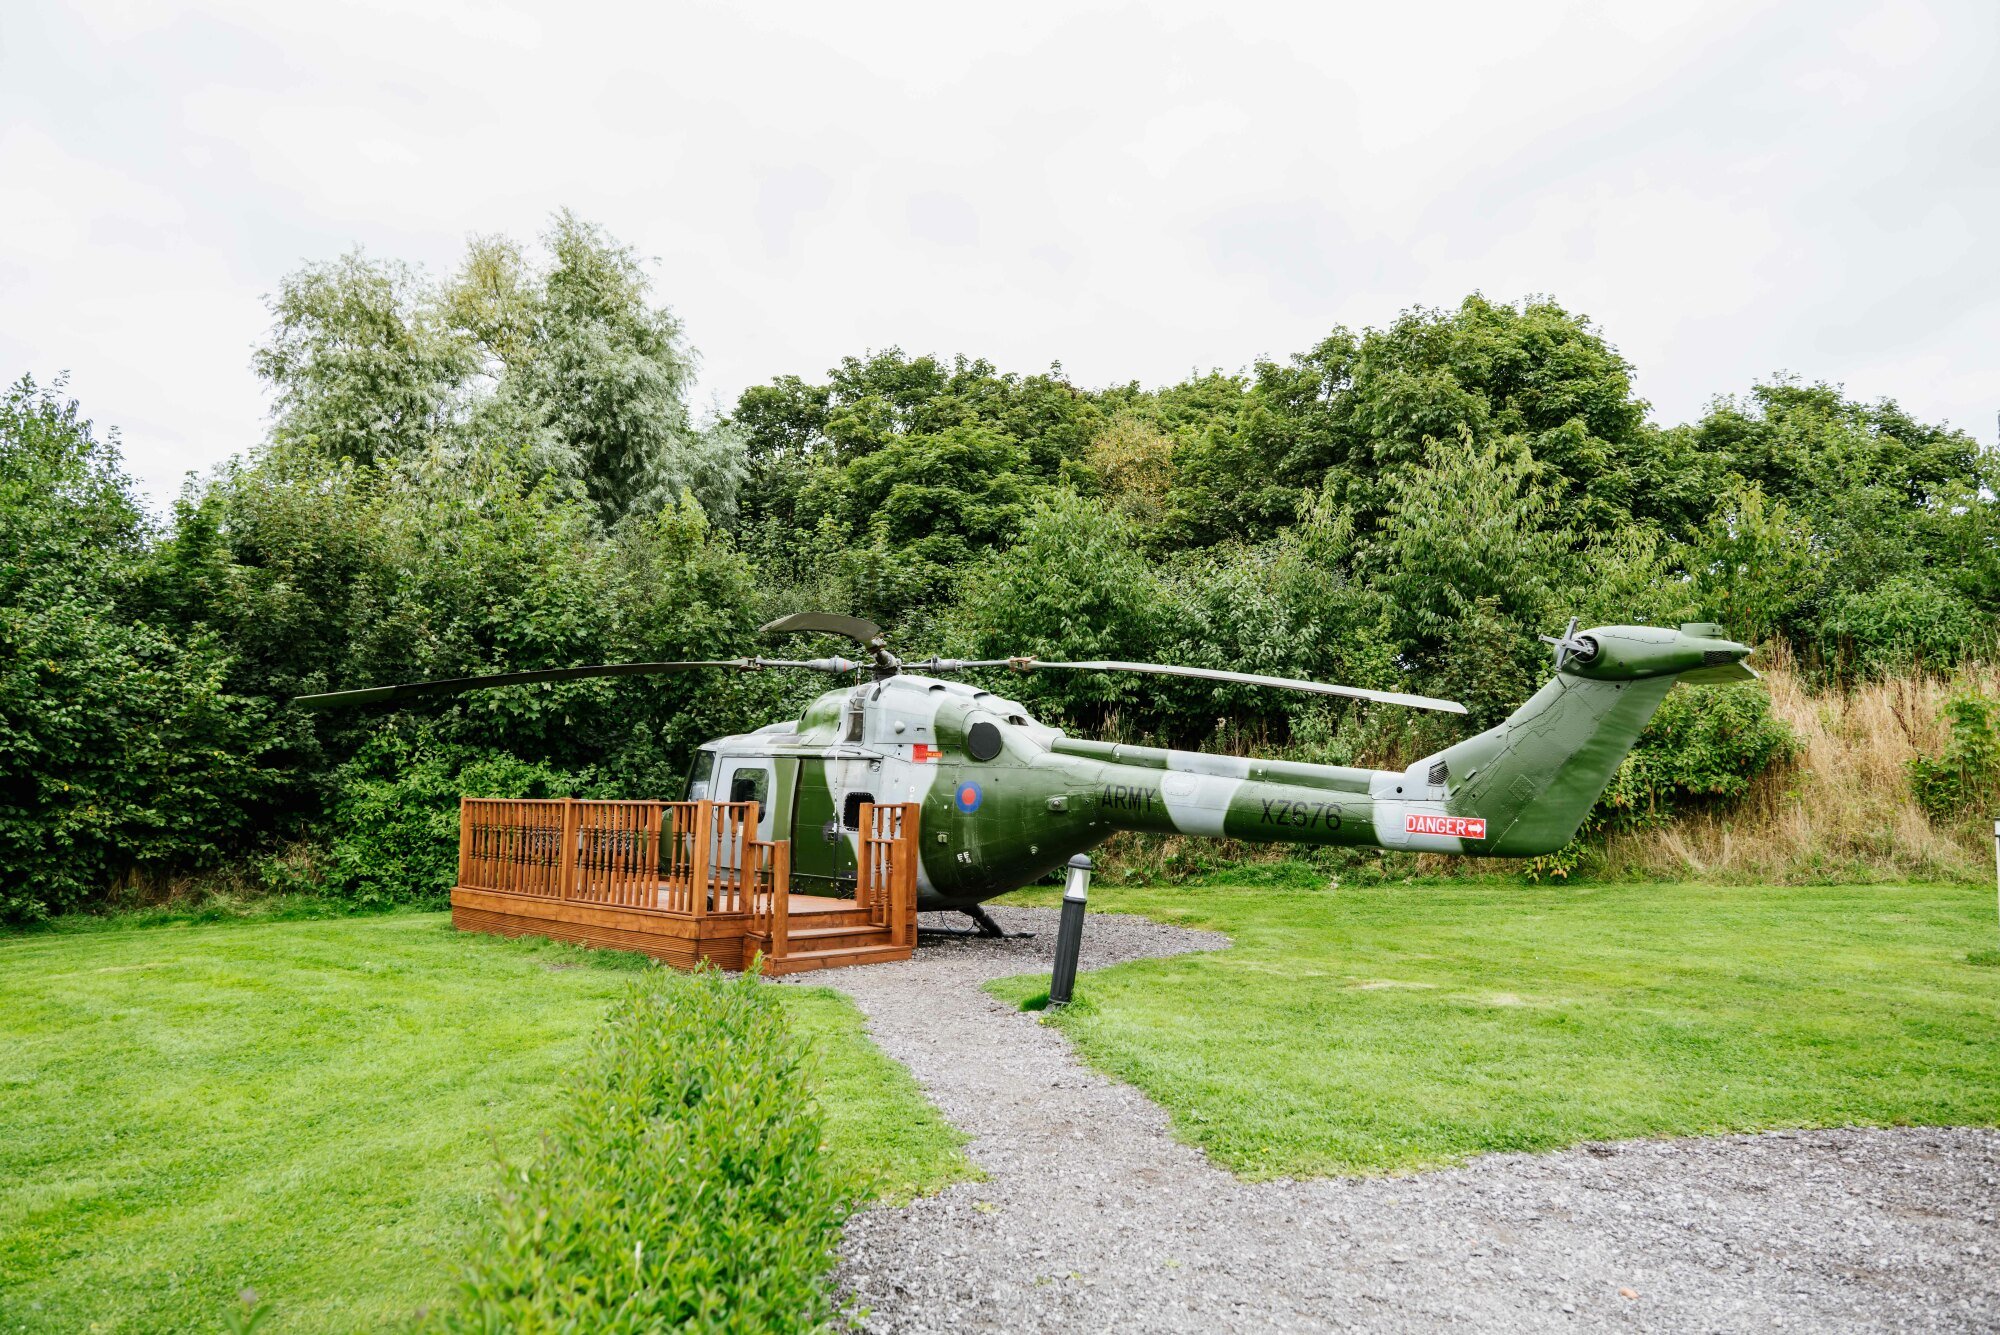 Airbnb listing of a helicopter in a field